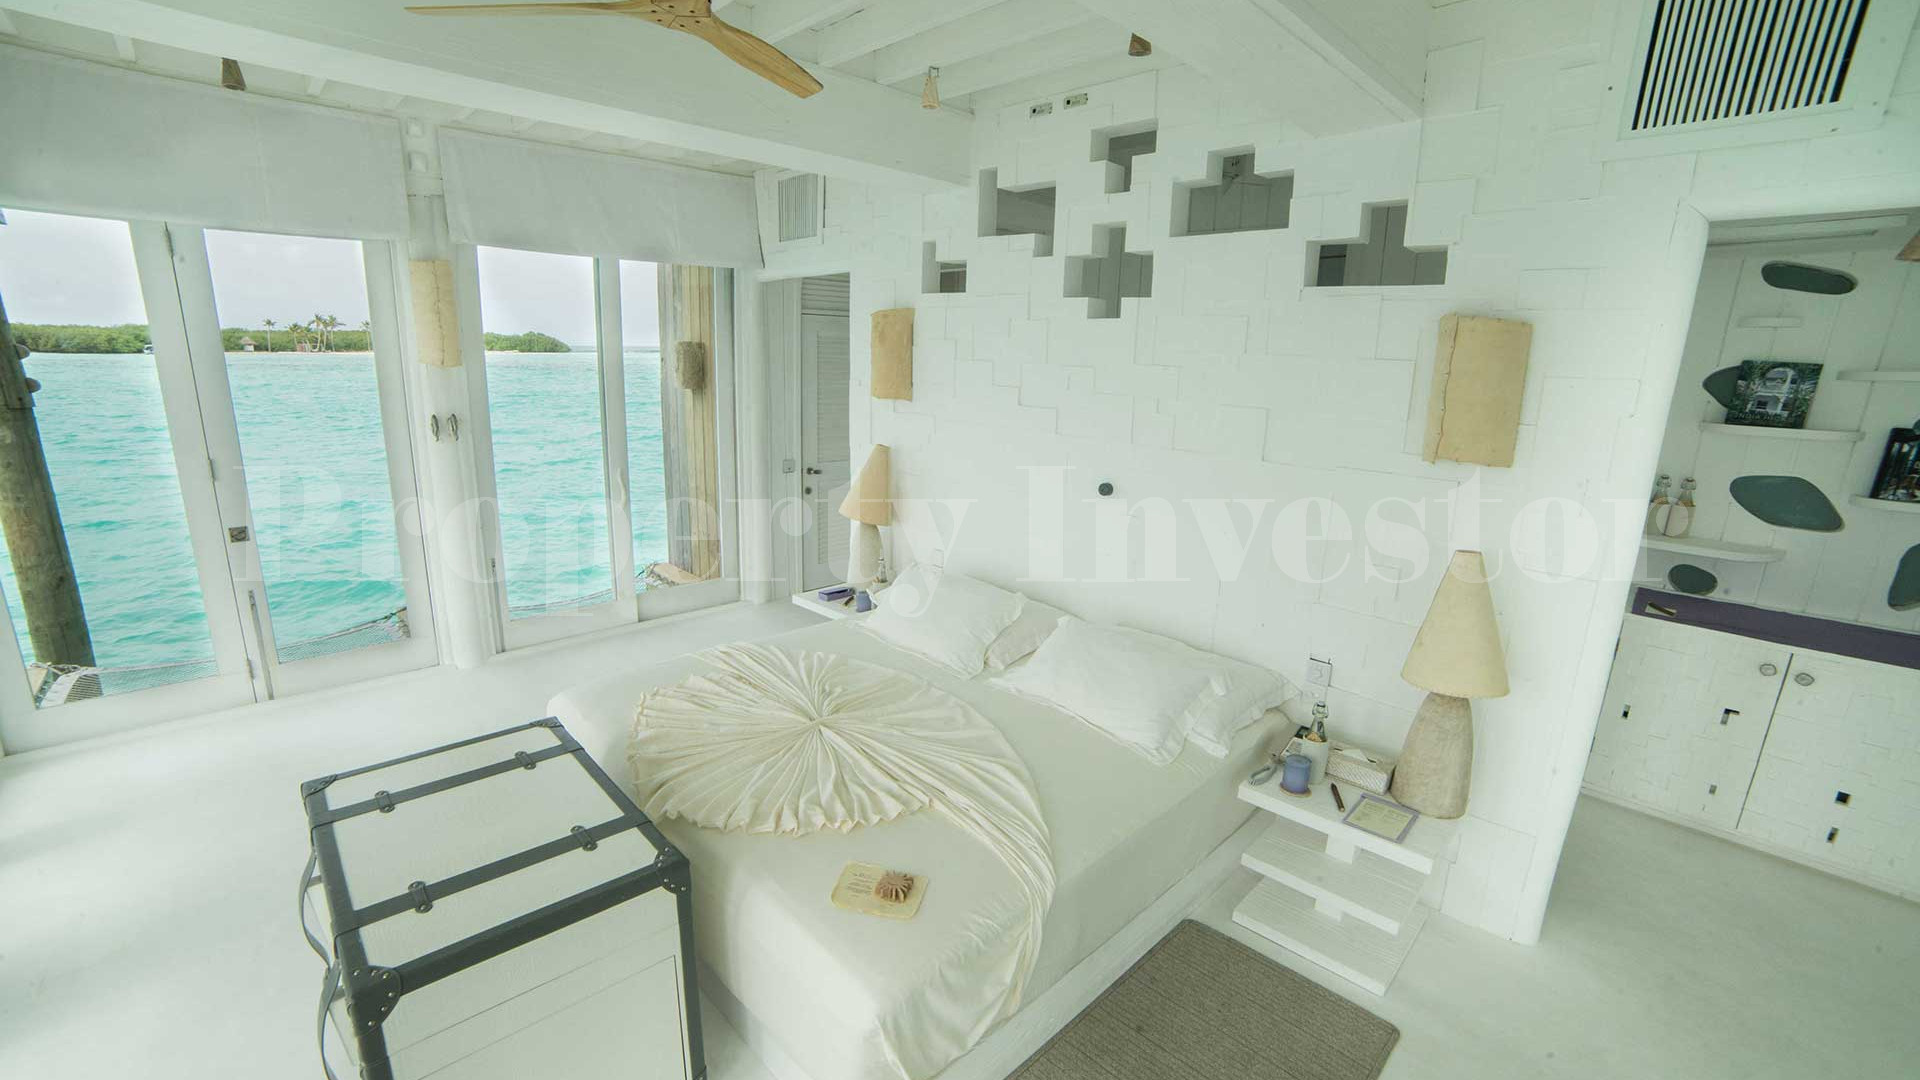 3 Bedroom Overwater Villa with Slide in the Maldives